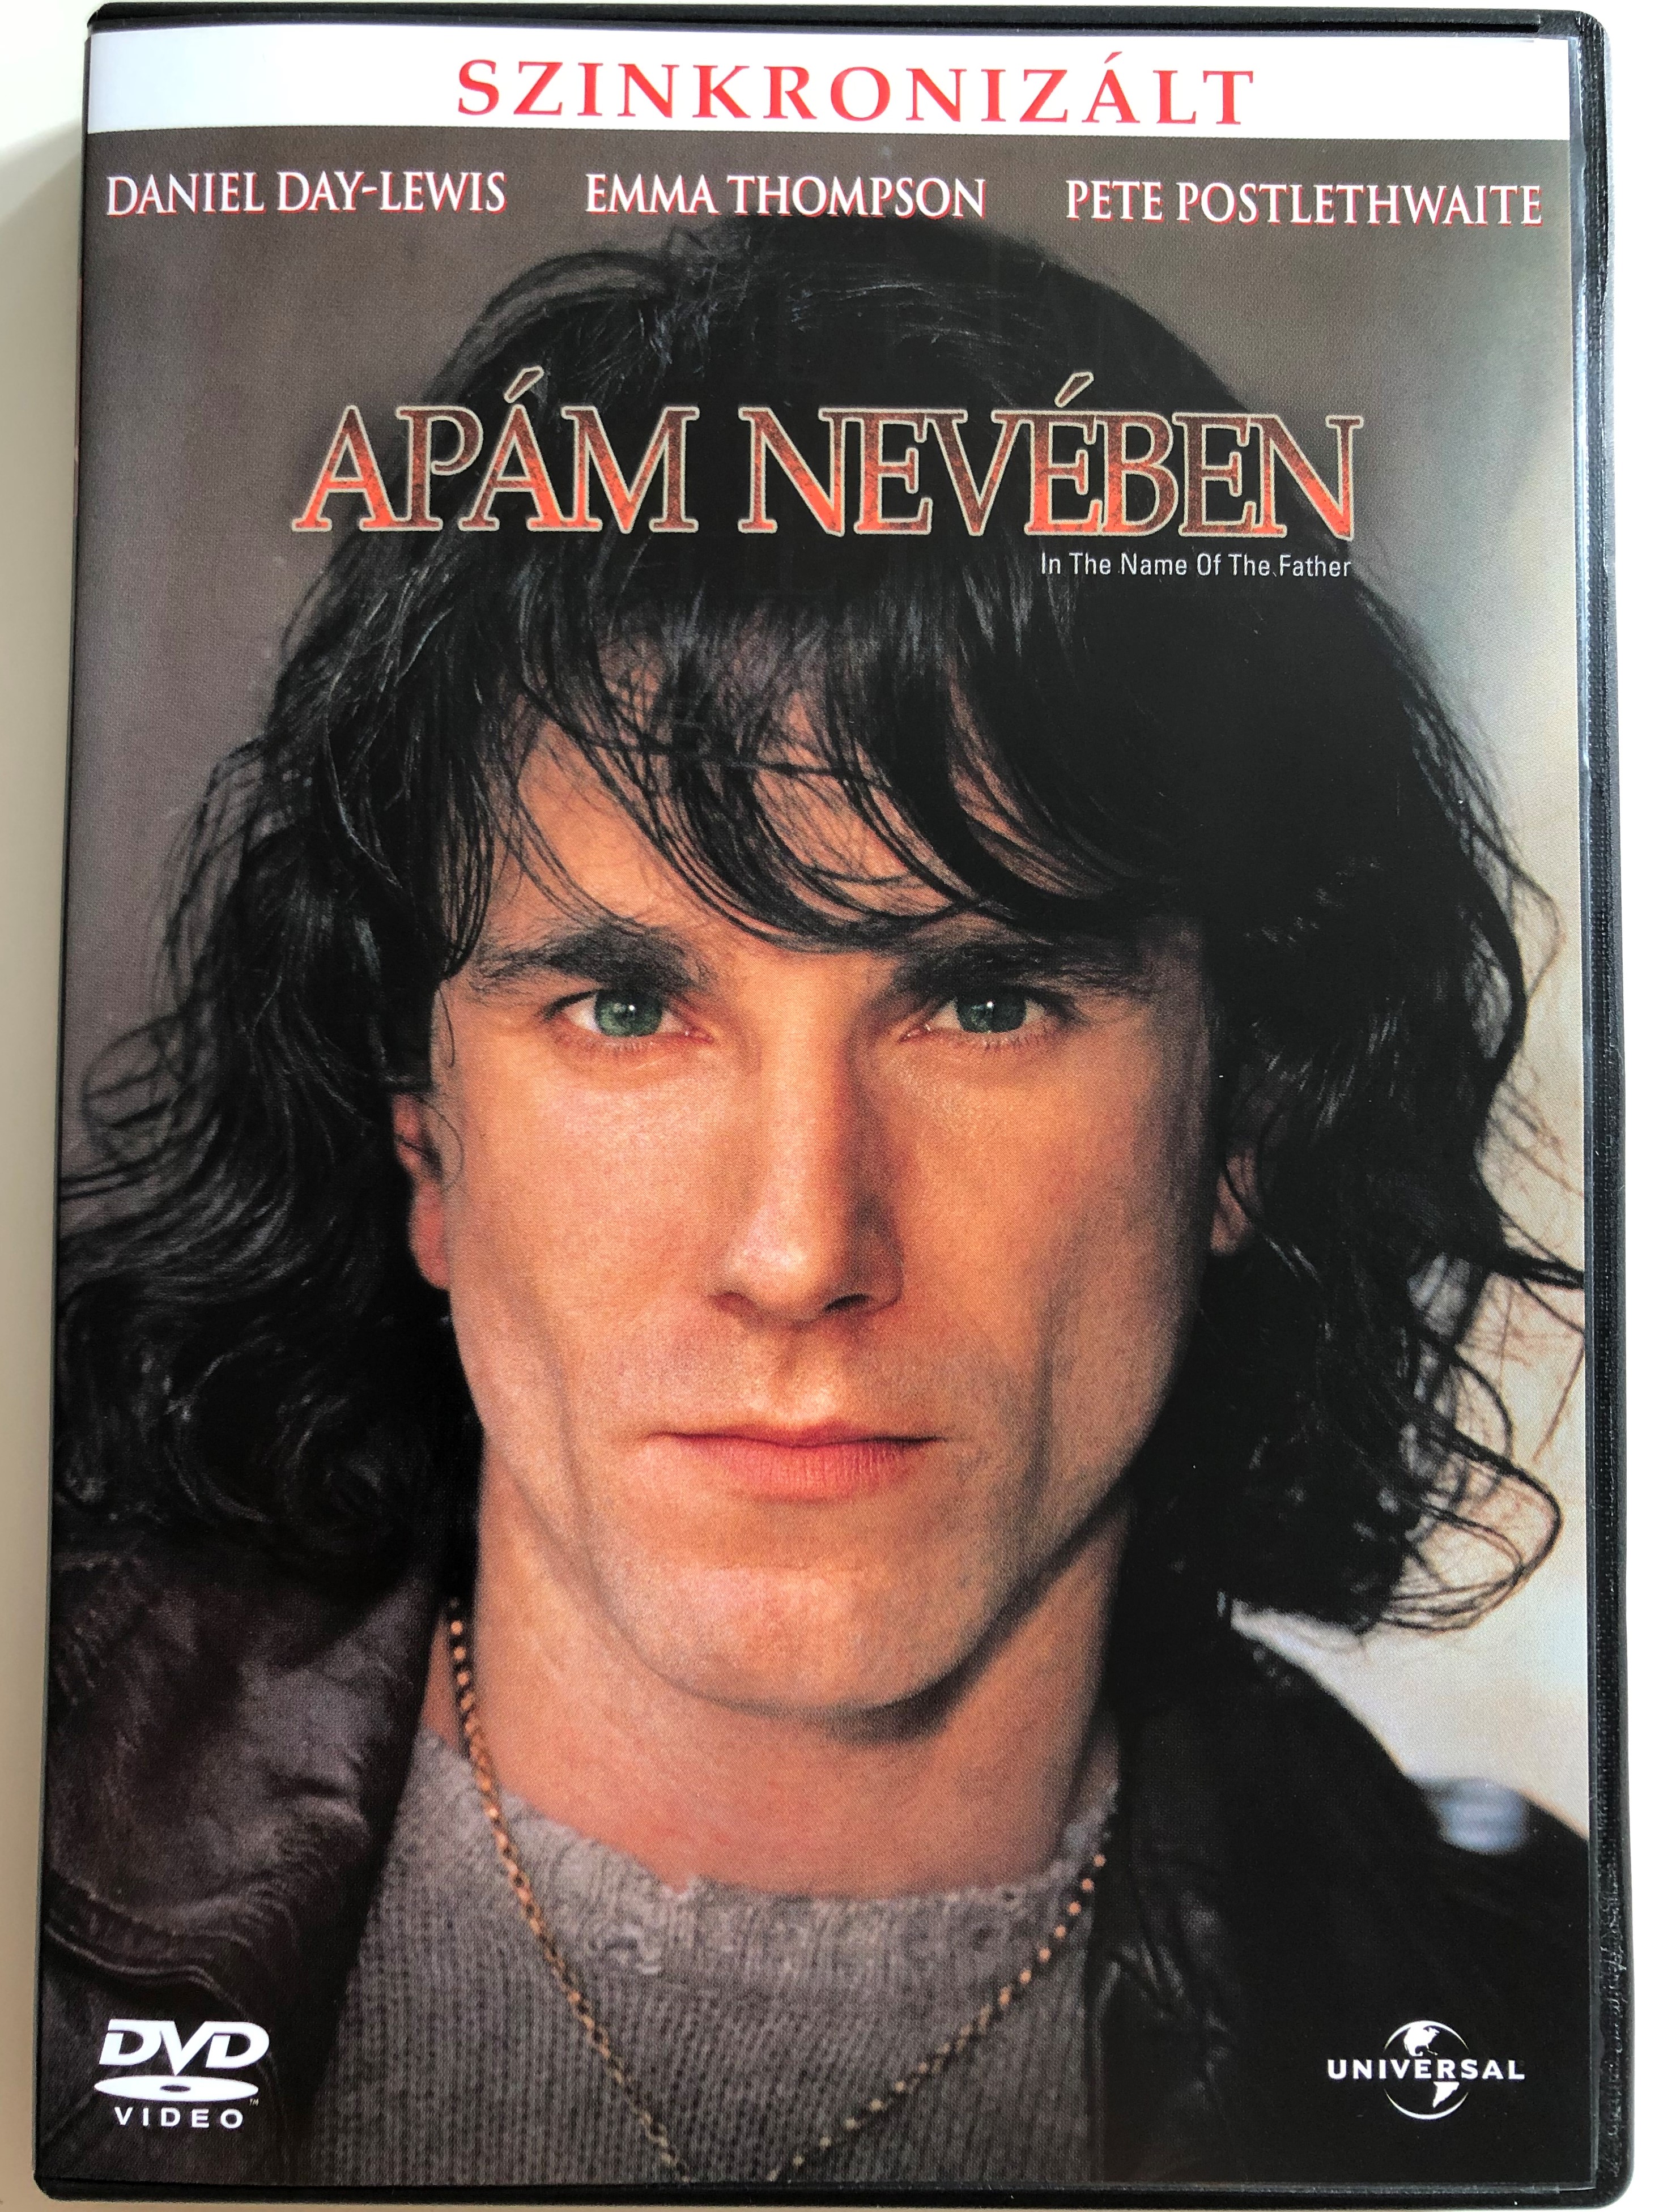 in-the-name-of-the-father-dvd-1993-ap-m-nev-ben-directed-by-jim-sheridan-starring-daniel-day-lewis-emma-thompson-pete-postlethwaite-1-.jpg